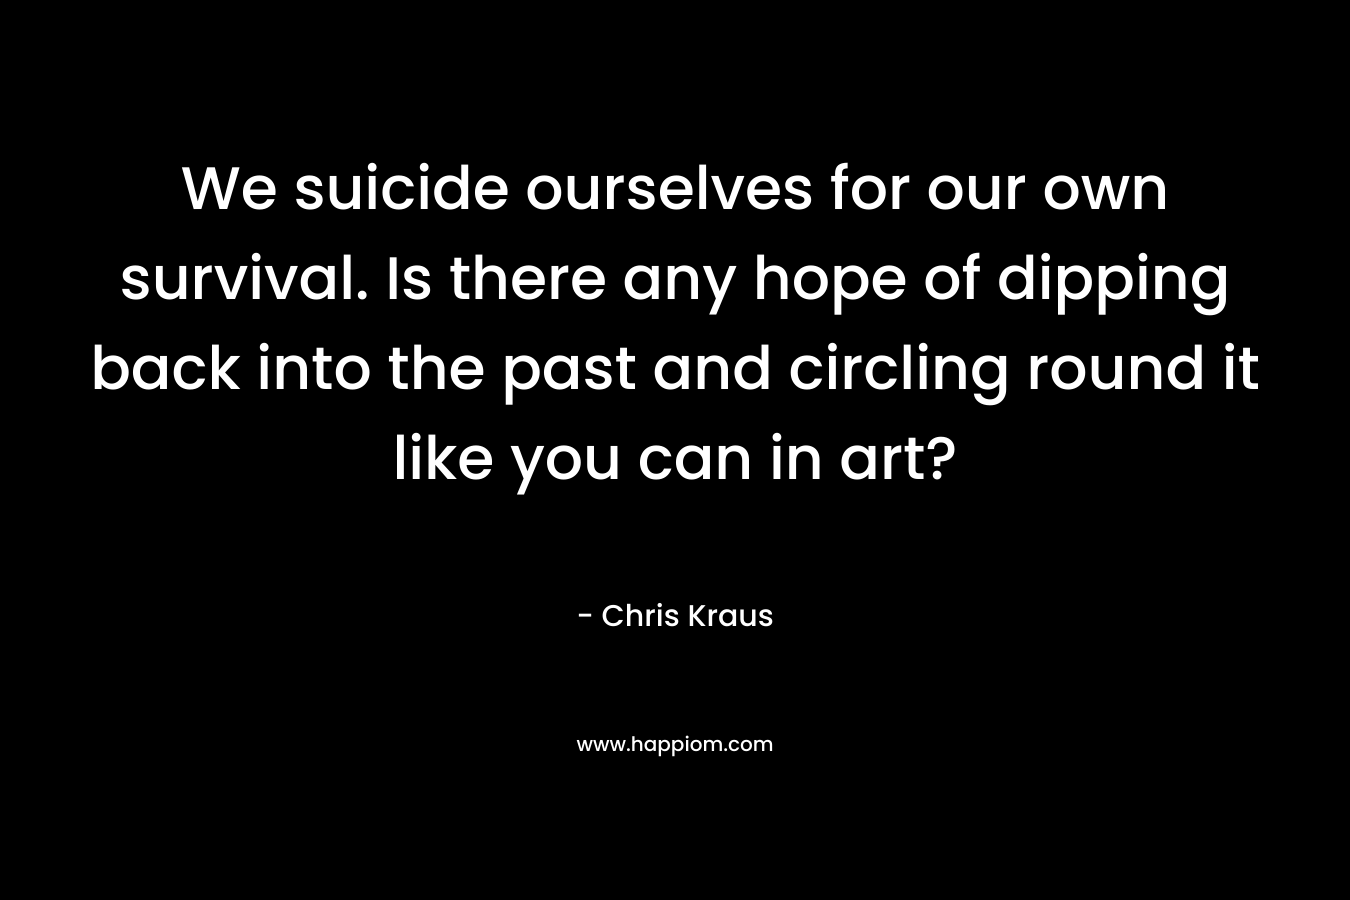 We suicide ourselves for our own survival. Is there any hope of dipping back into the past and circling round it like you can in art? – Chris Kraus